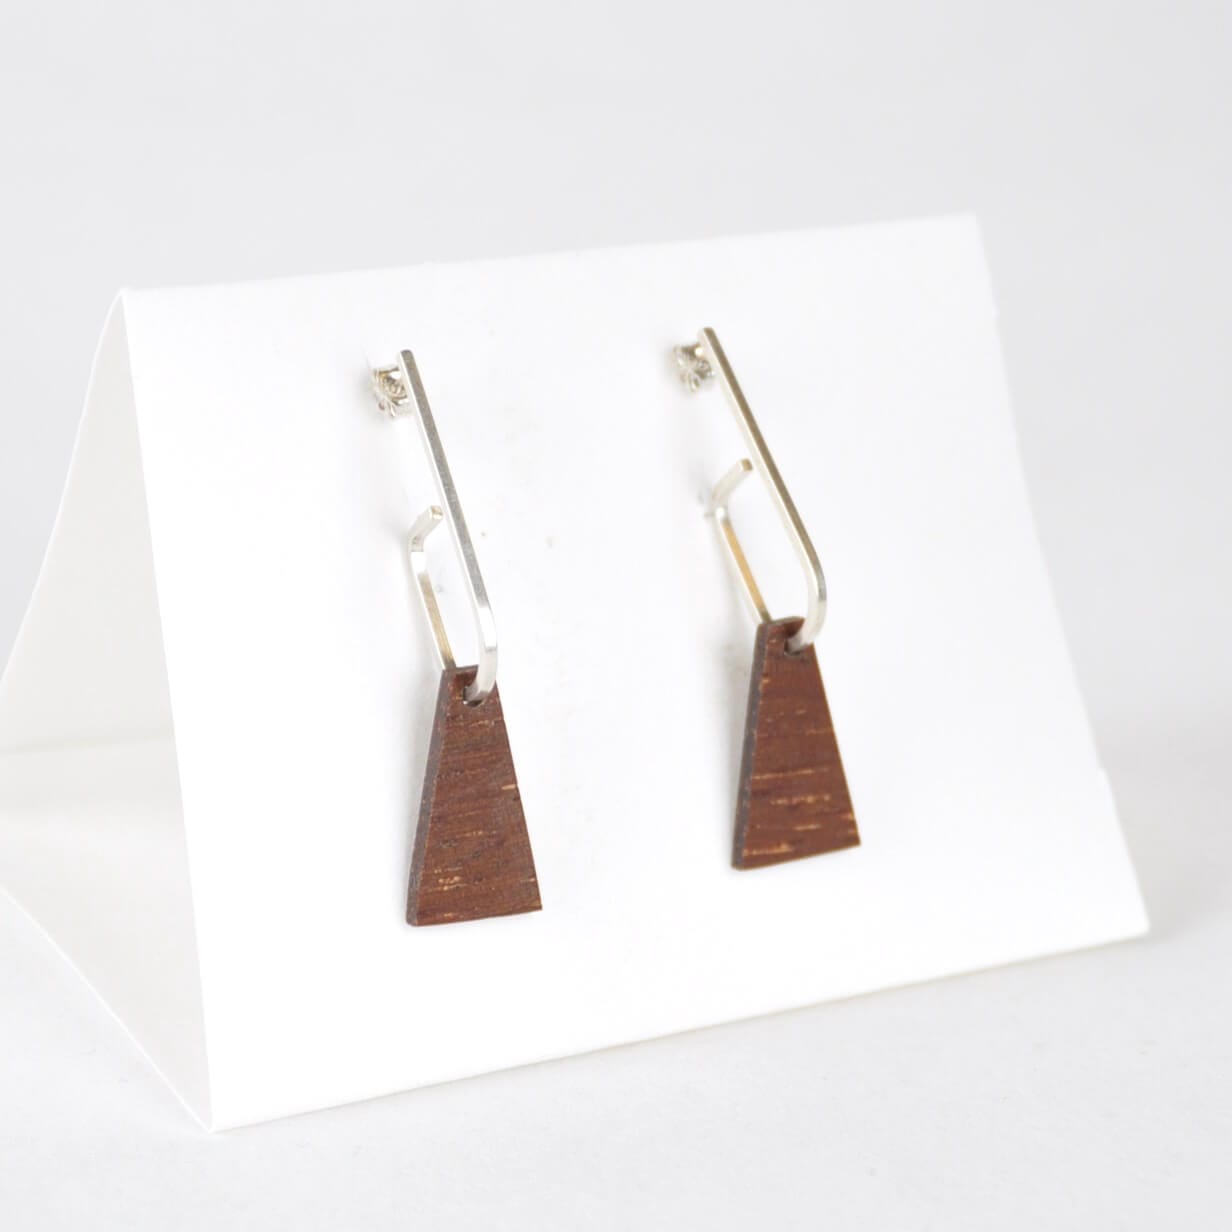 Priormade Woods d - Jarrah ‘Jay x Wood ’ - Eco Silver and Reclaimed Wooden Earrings (multiple styles)